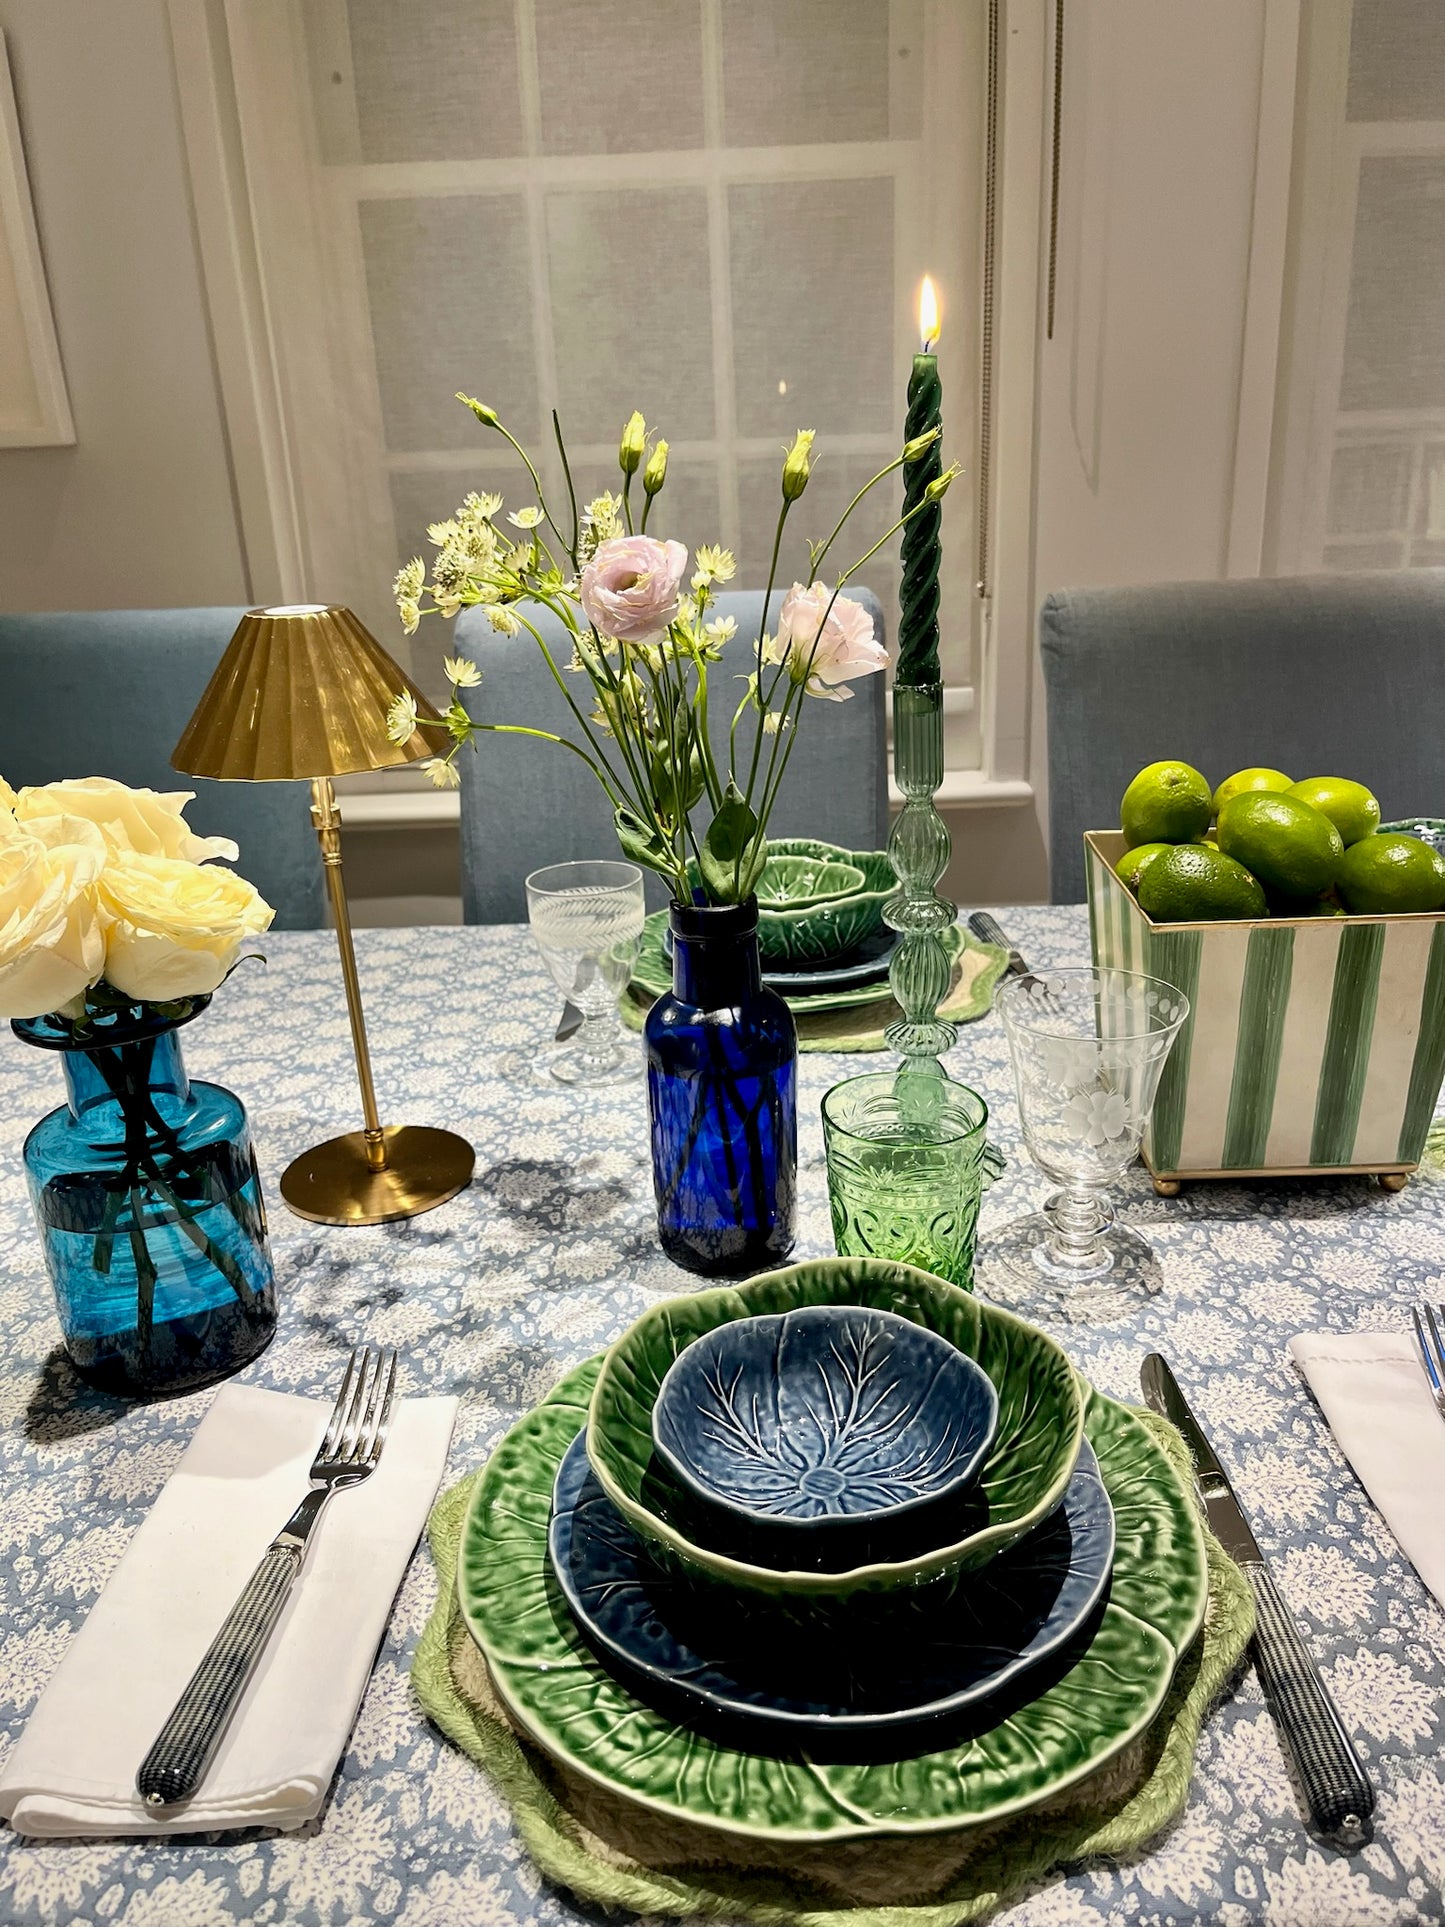 Blue Flower Tablecloth with Green Striped Border Not specified